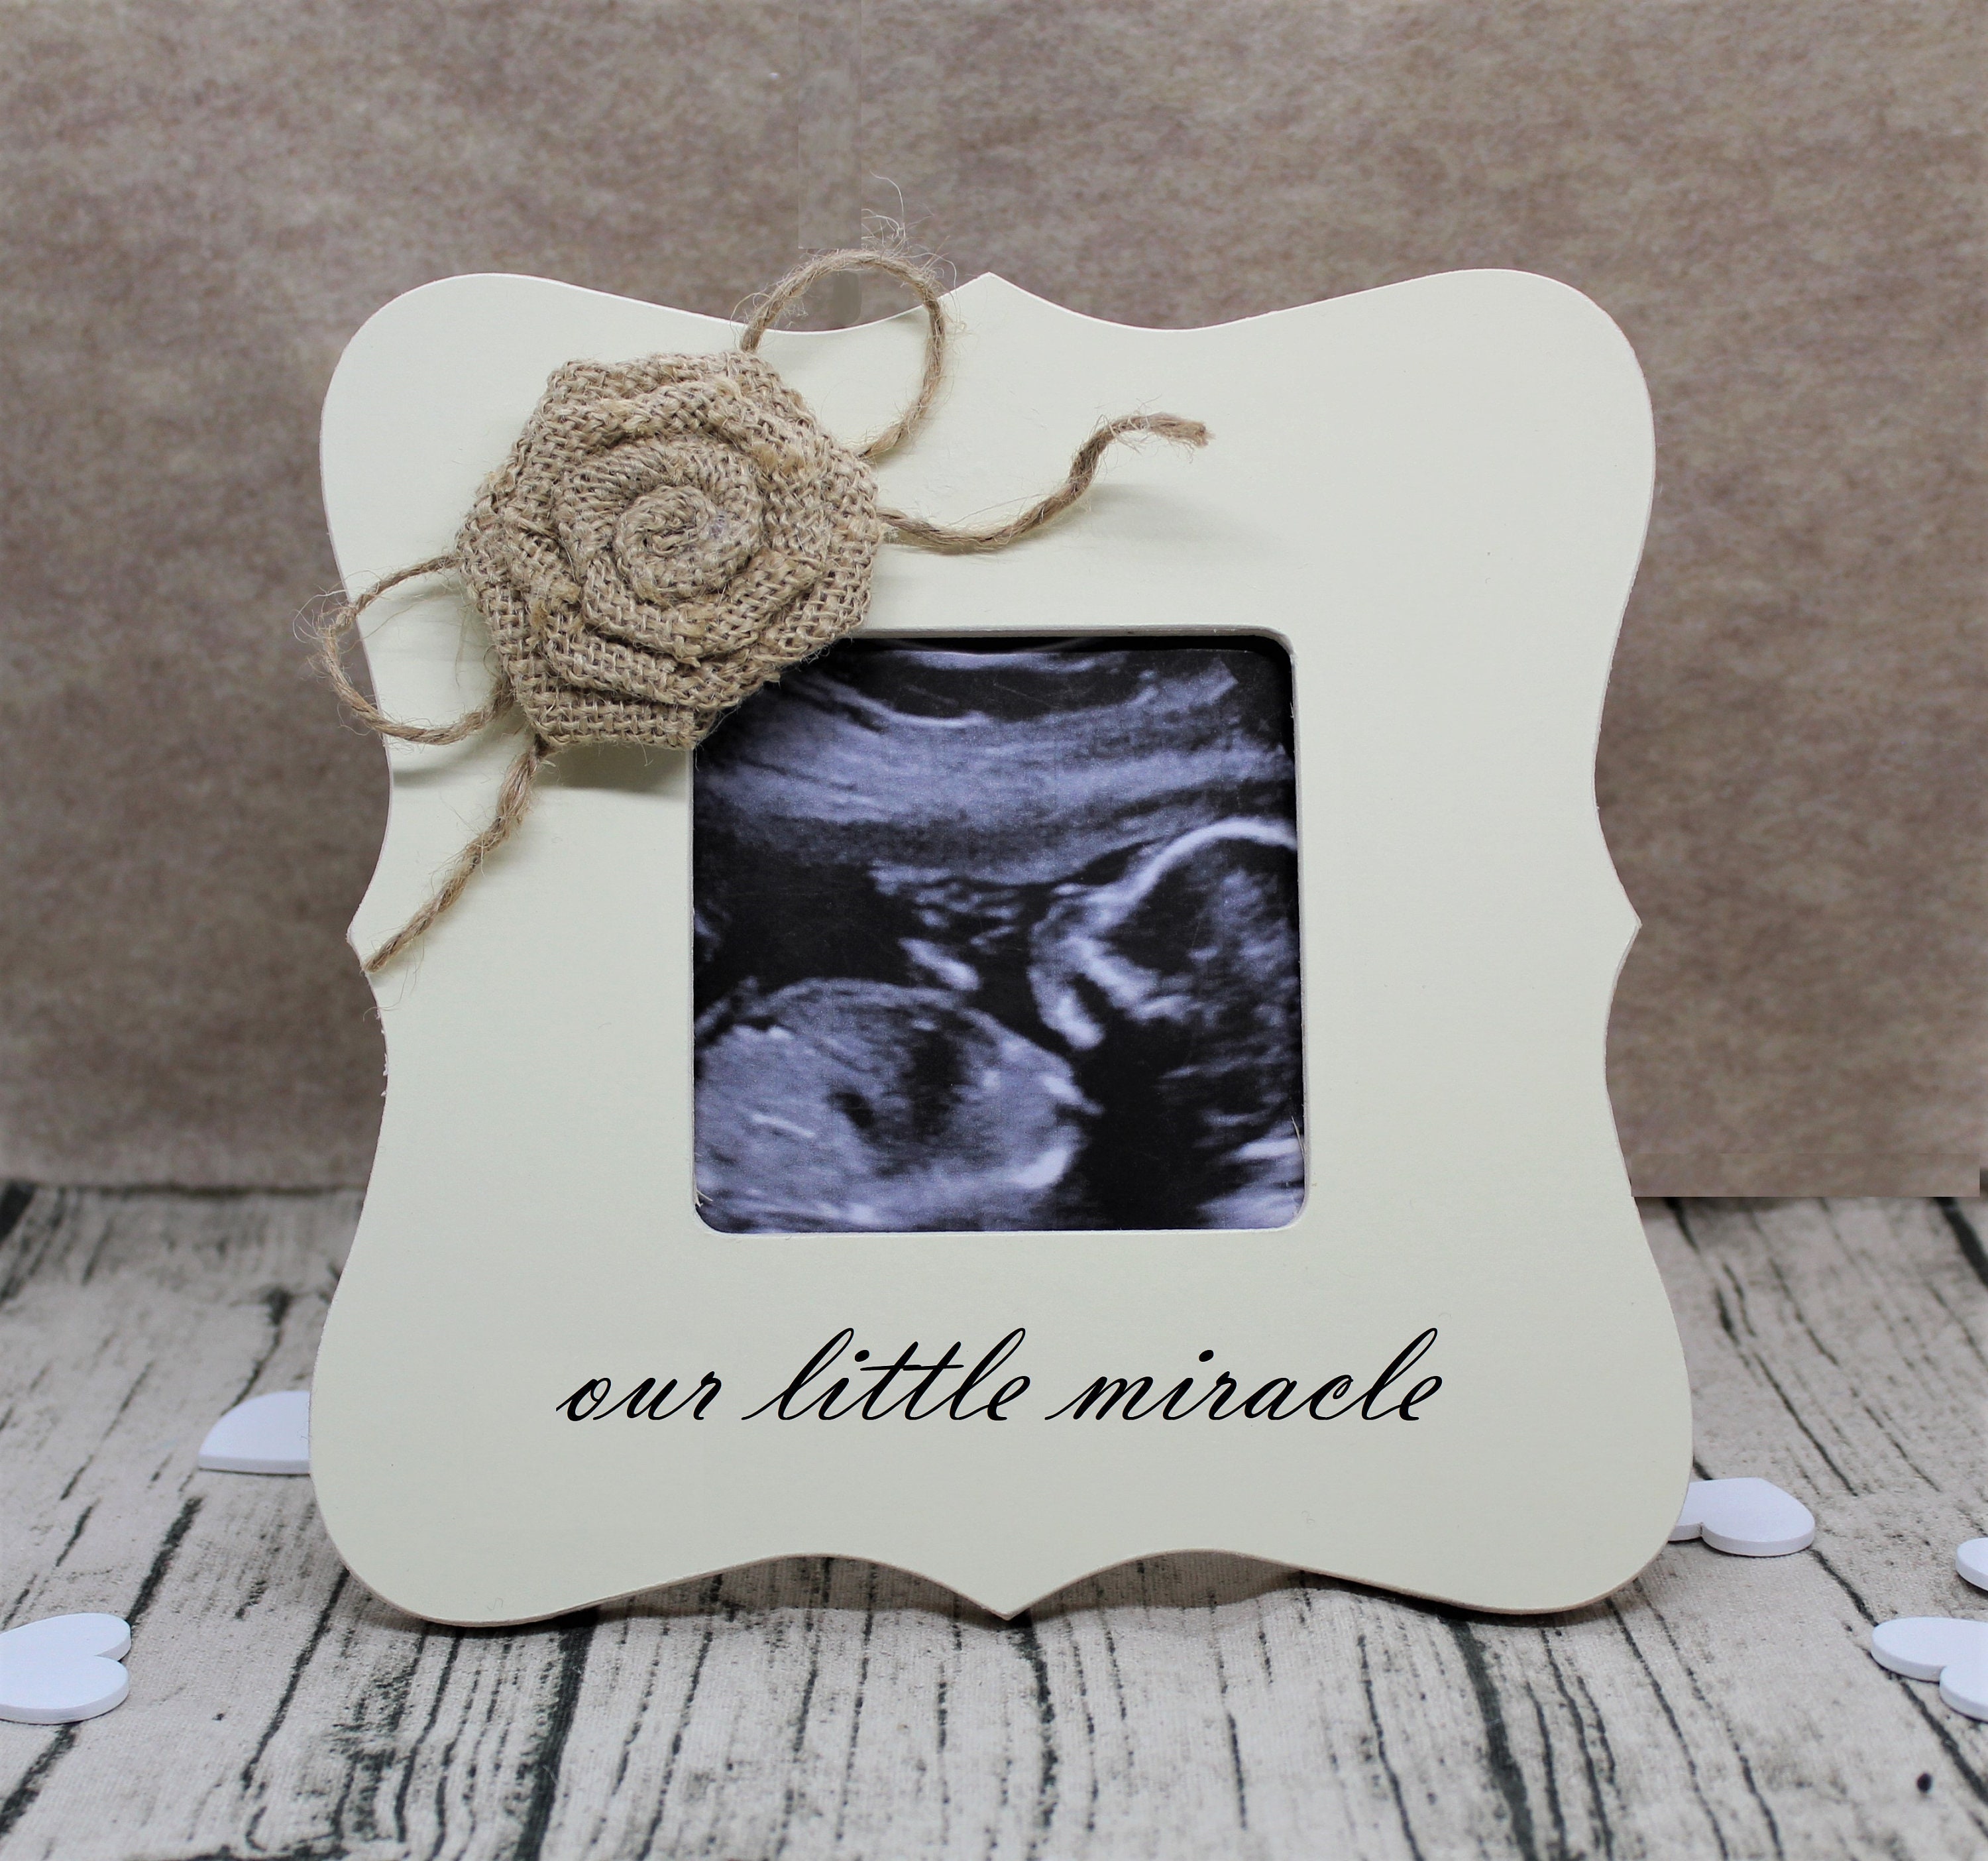 Celebrate The Miracle Of Life With New Baby and Pregnancy Gifts - Black Bow  Gift Co.